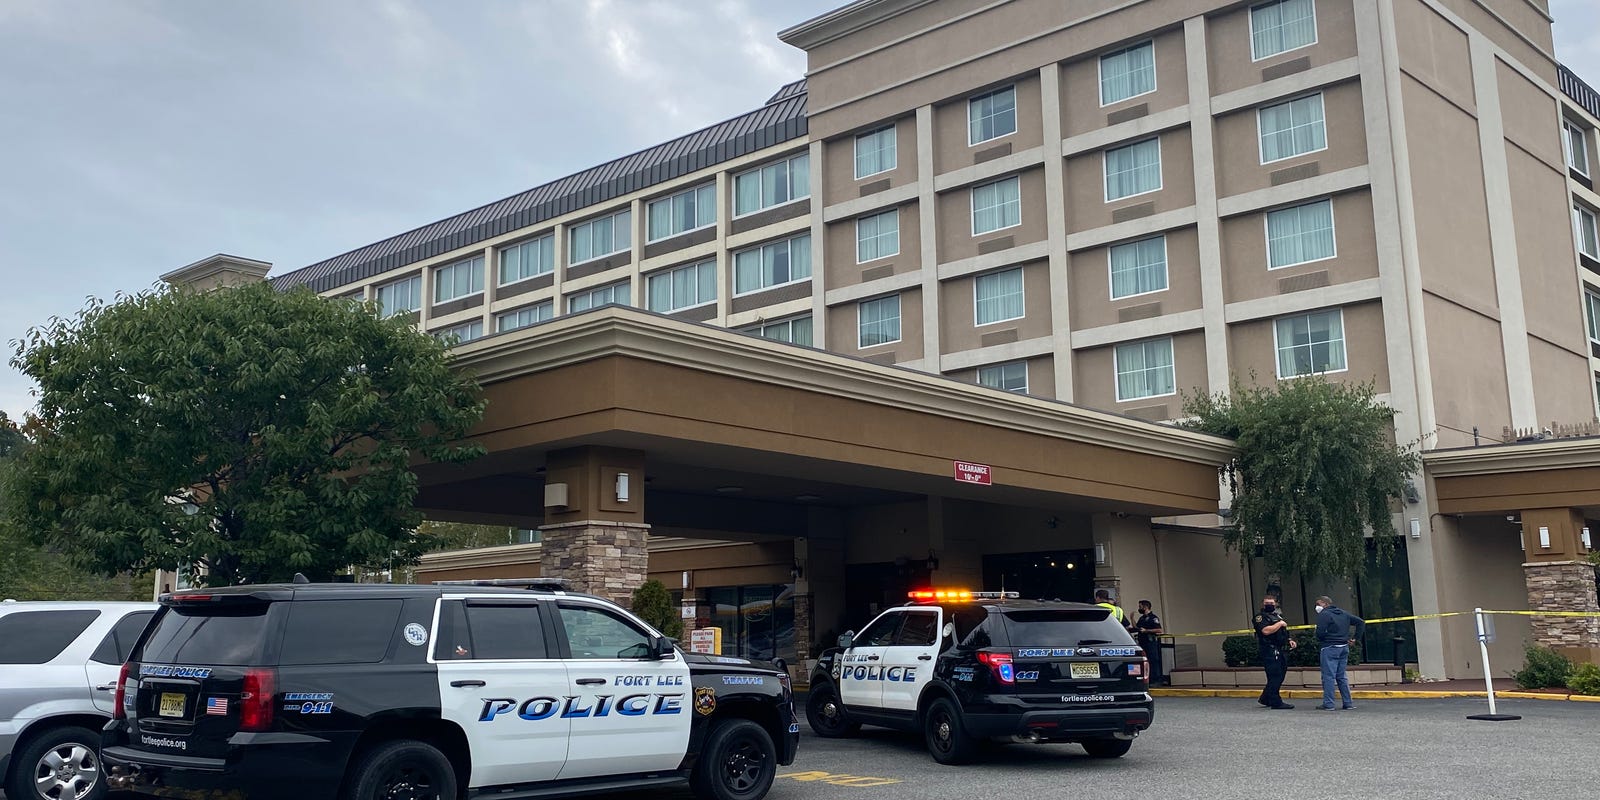 Man shot outside Holiday Inn on Route 4 in Fort Lee NJ